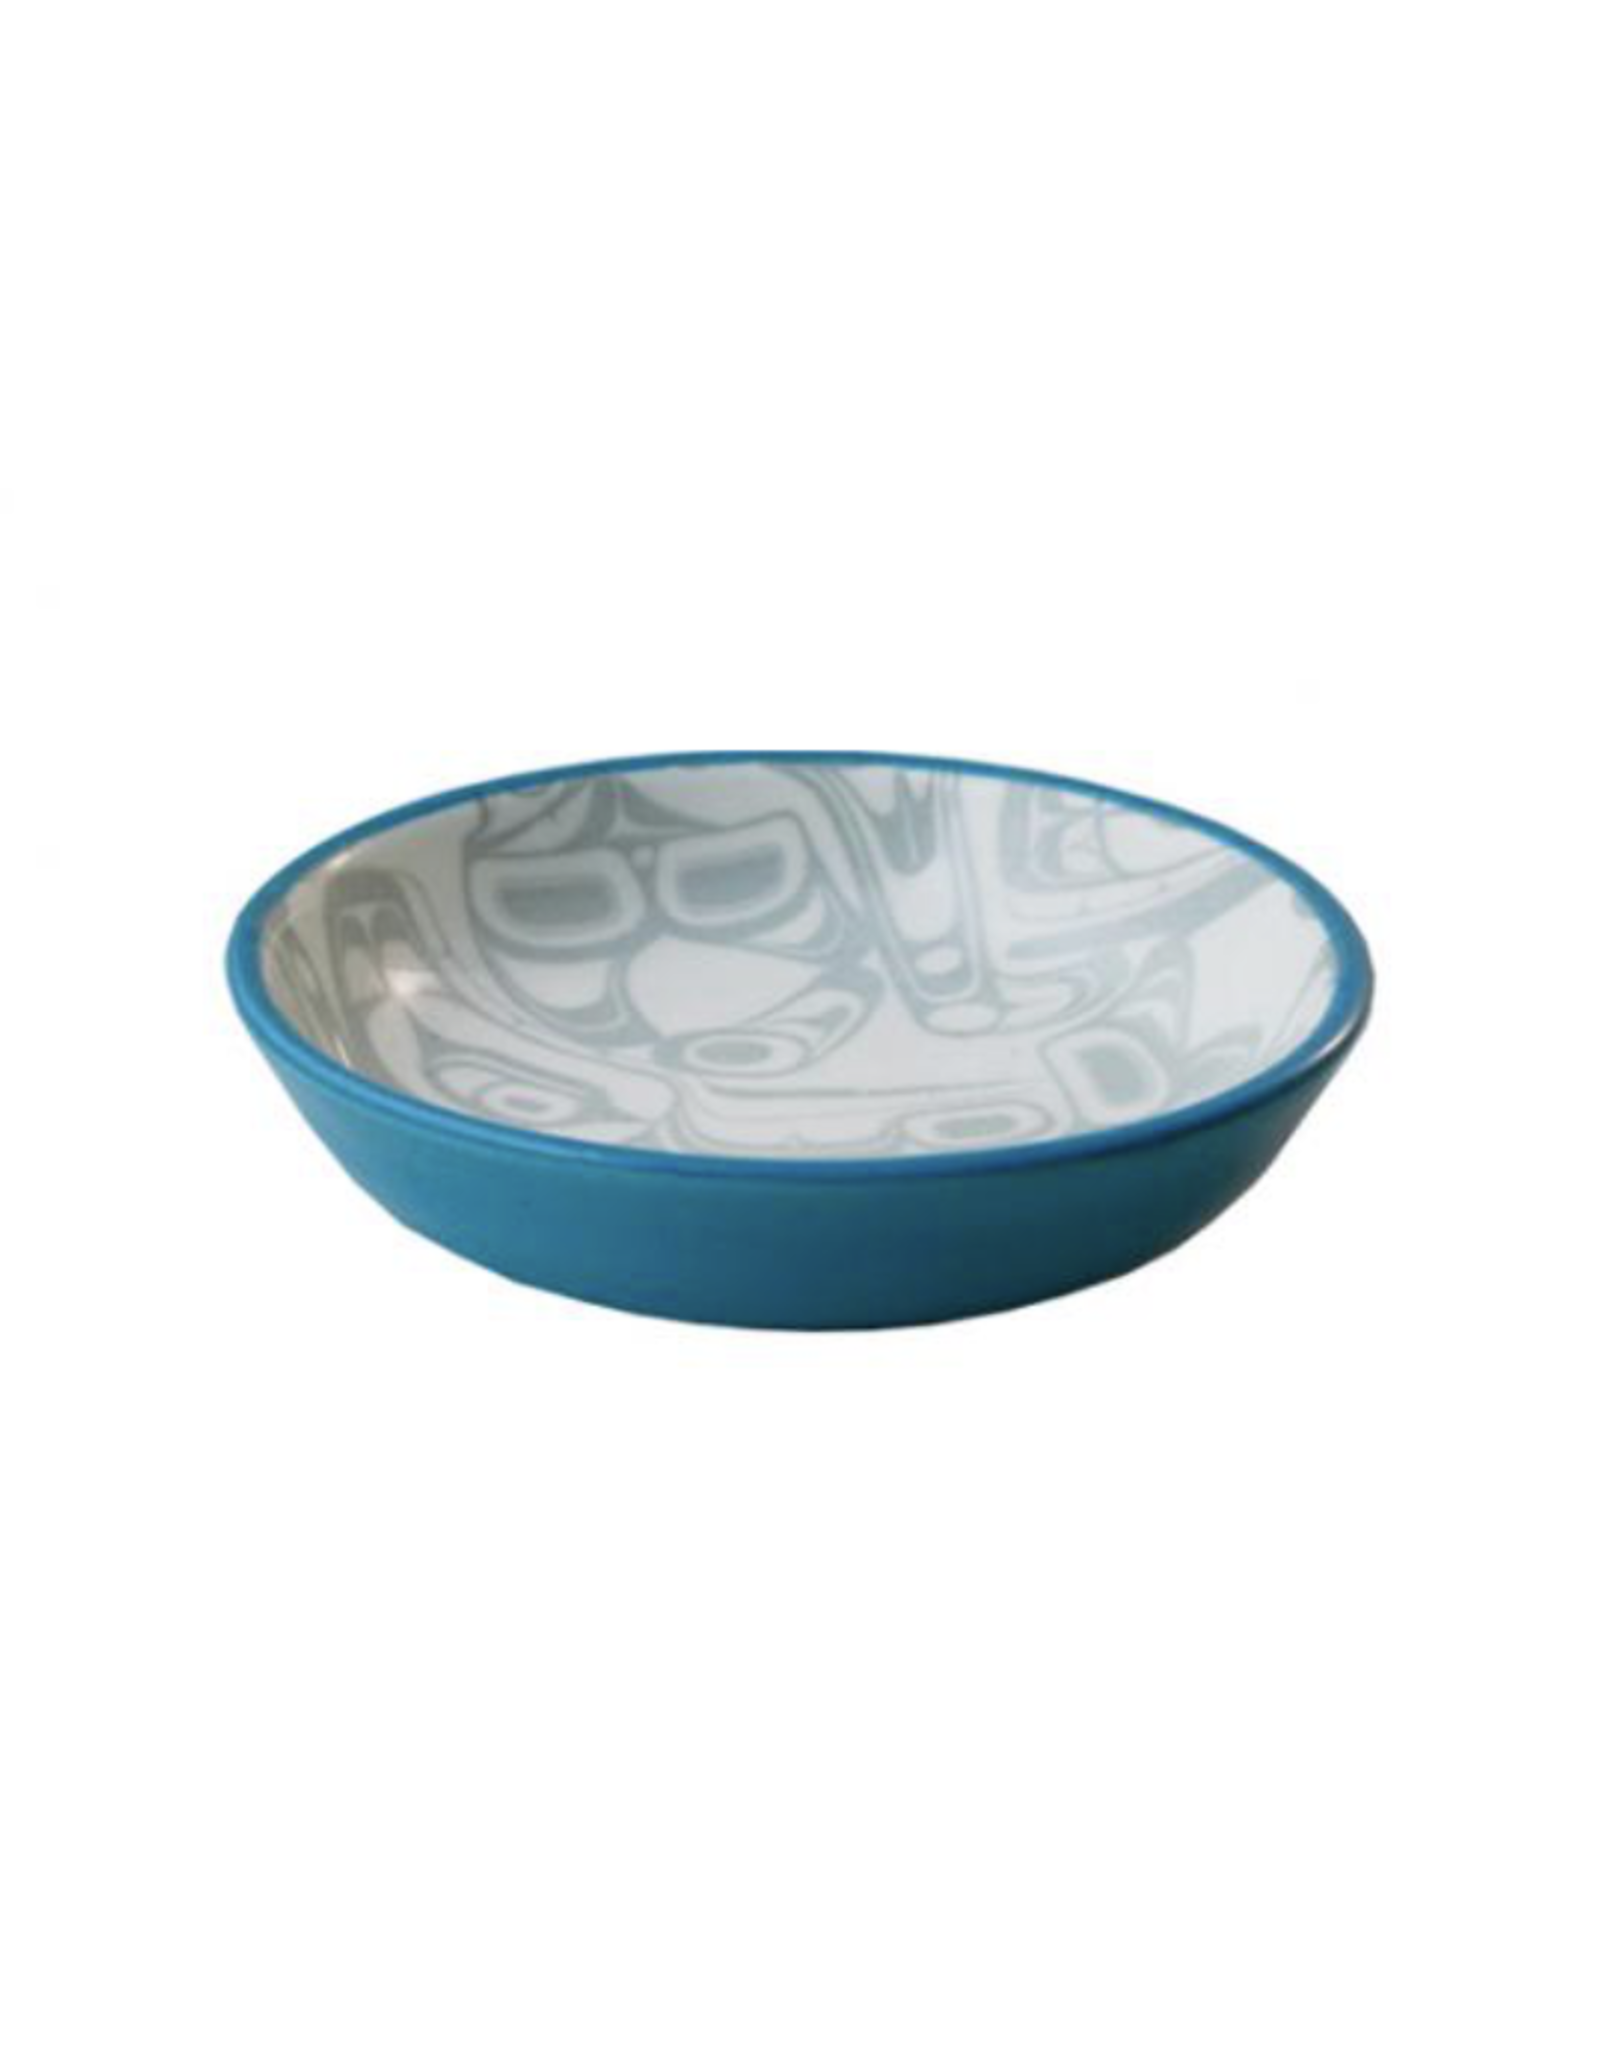 320 Small Dish - Orca Turquoise/Grey